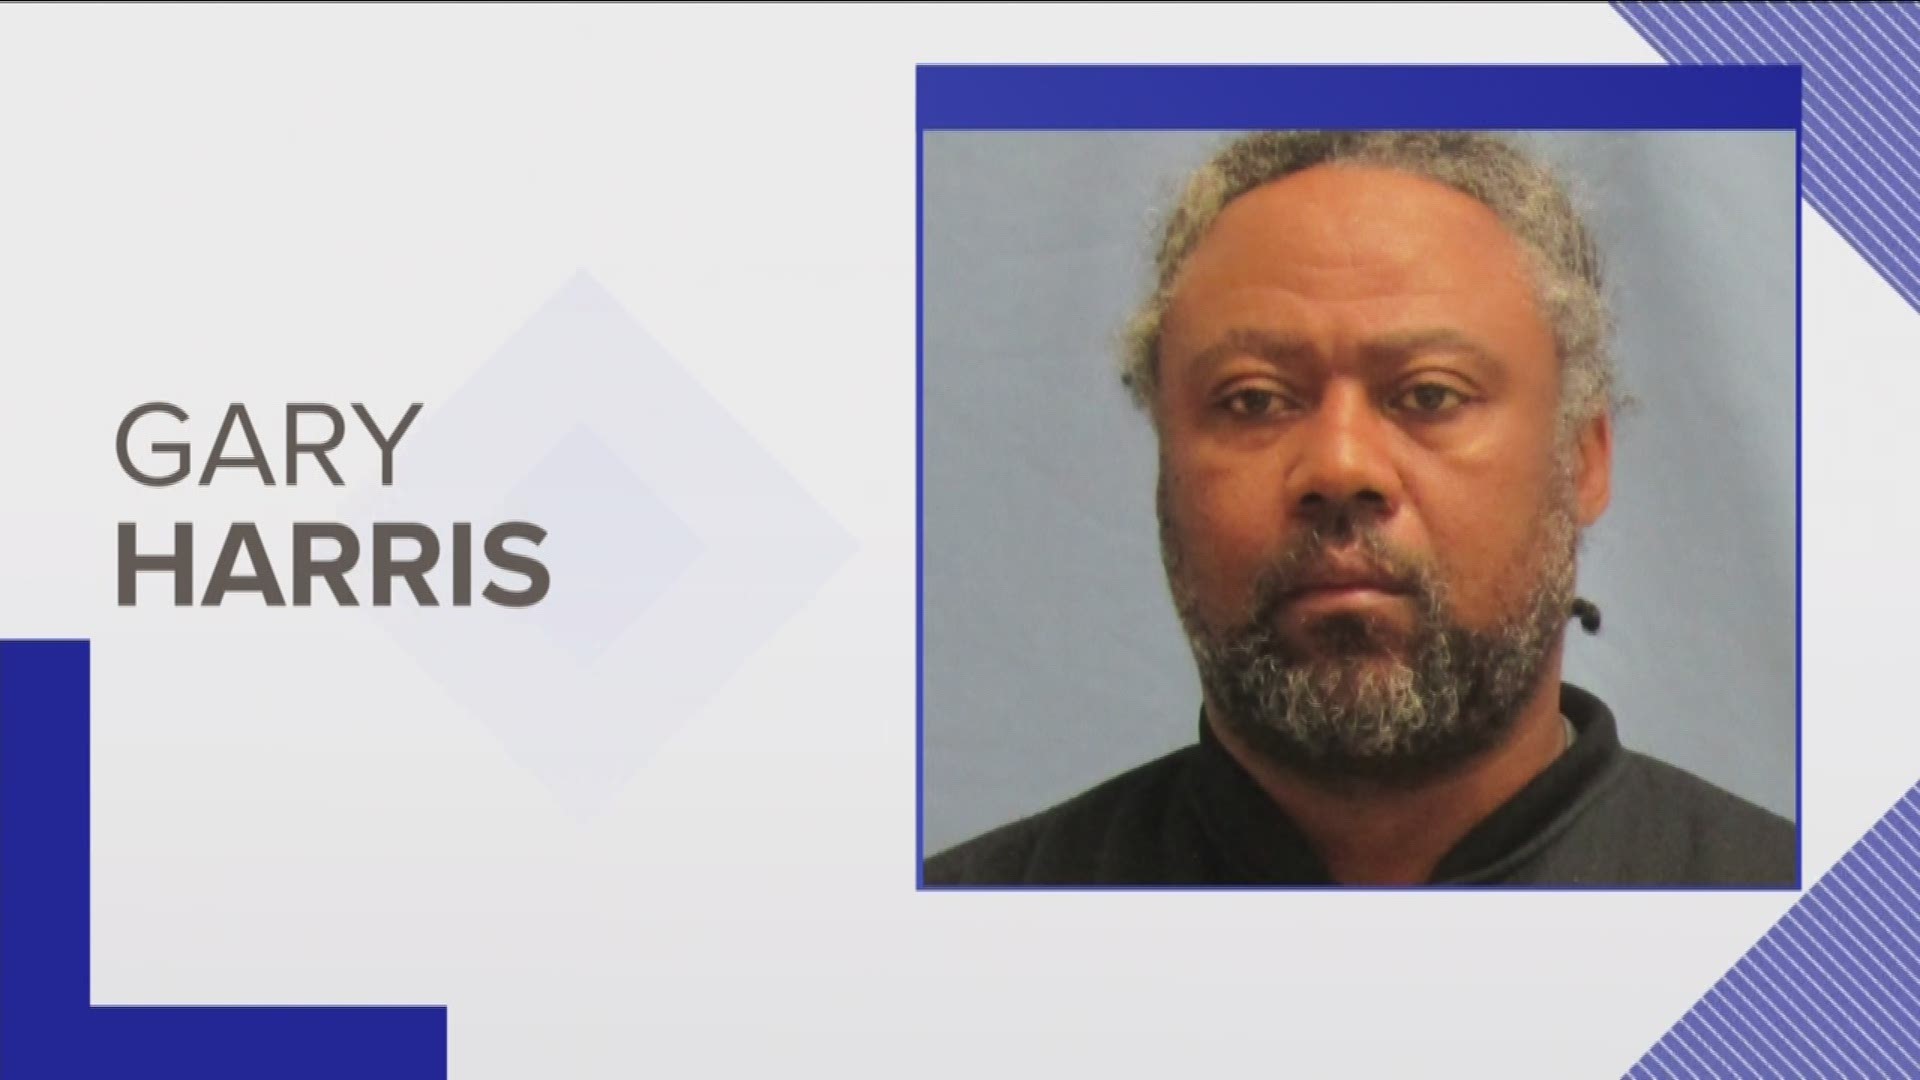 A man has been arrested in connection to the shooting of a dog in Argenta.